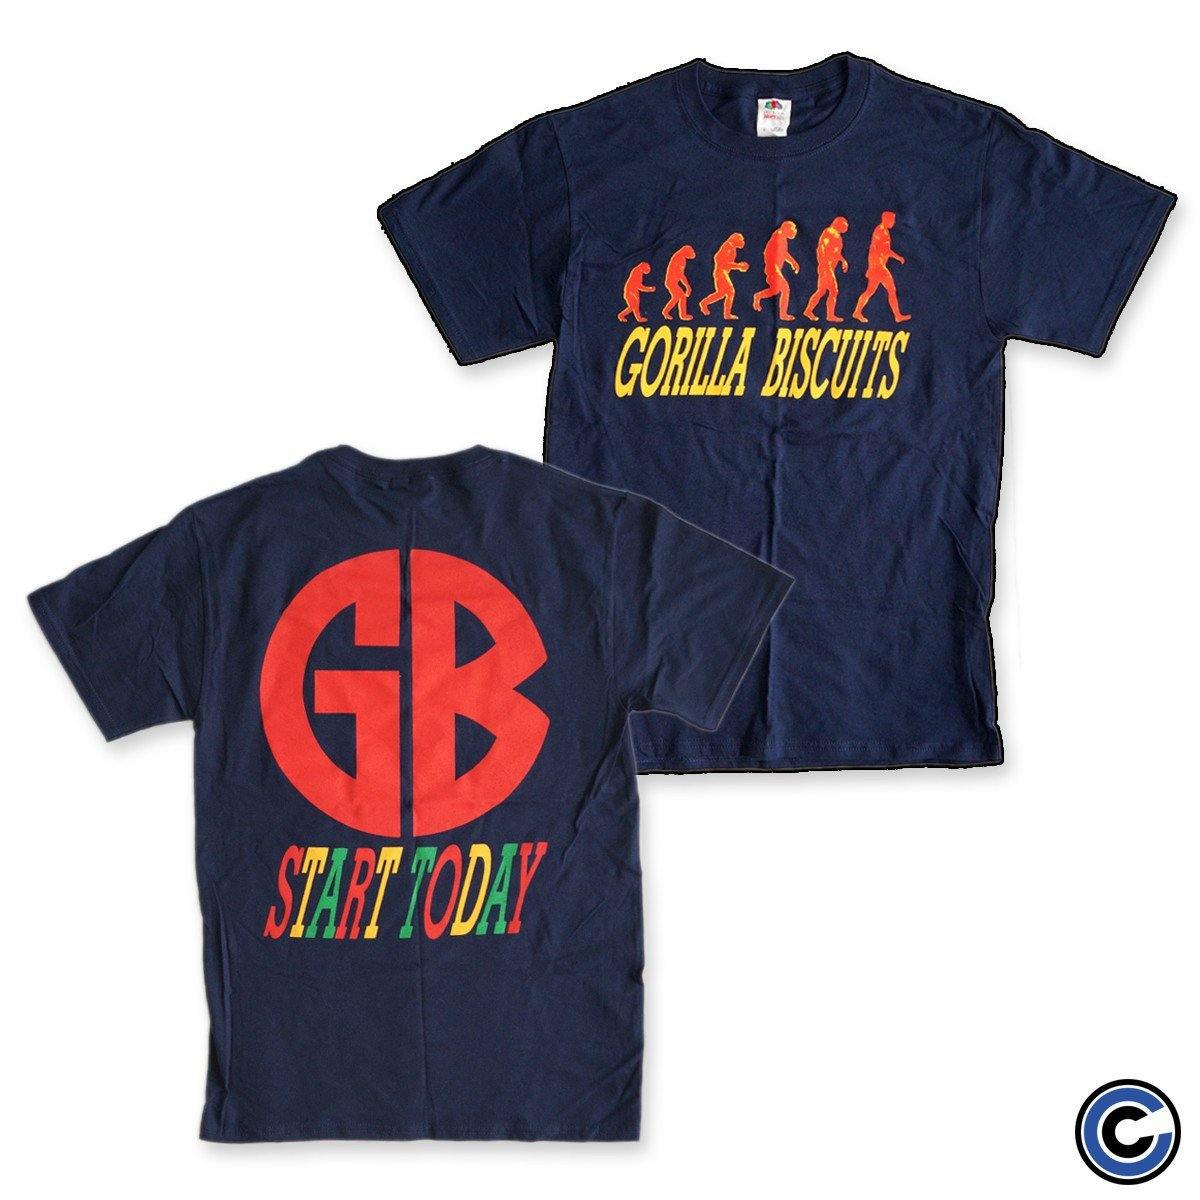 Buy – Gorilla Biscuits "Start Today" Shirt – Band & Music Merch – Cold Cuts Merch